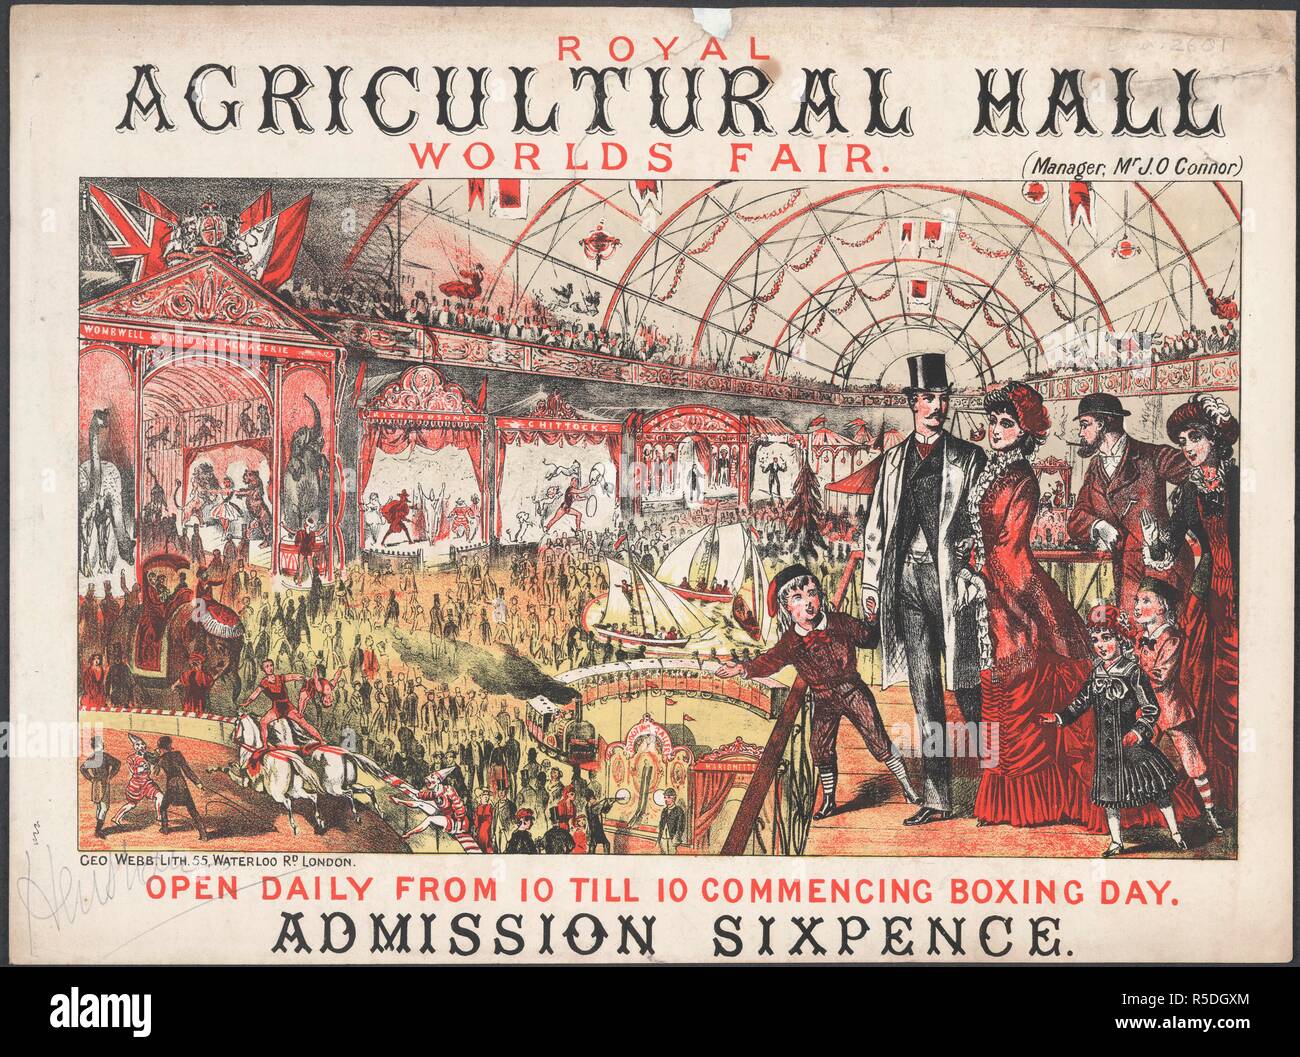 Royal Agricultural Hall. A collection of pamphlets, handbills, and miscella. London, 1880. A poster for the Worlds Fair to be held at the Royal Agricultural Hall.  Image taken from A collection of pamphlets, handbills, and miscellaneous printed matter relating to Victorian entertainment and everyday life.  Originally published/produced in London, 1880. . Source: EVAN.2601,. Language: English. Stock Photo